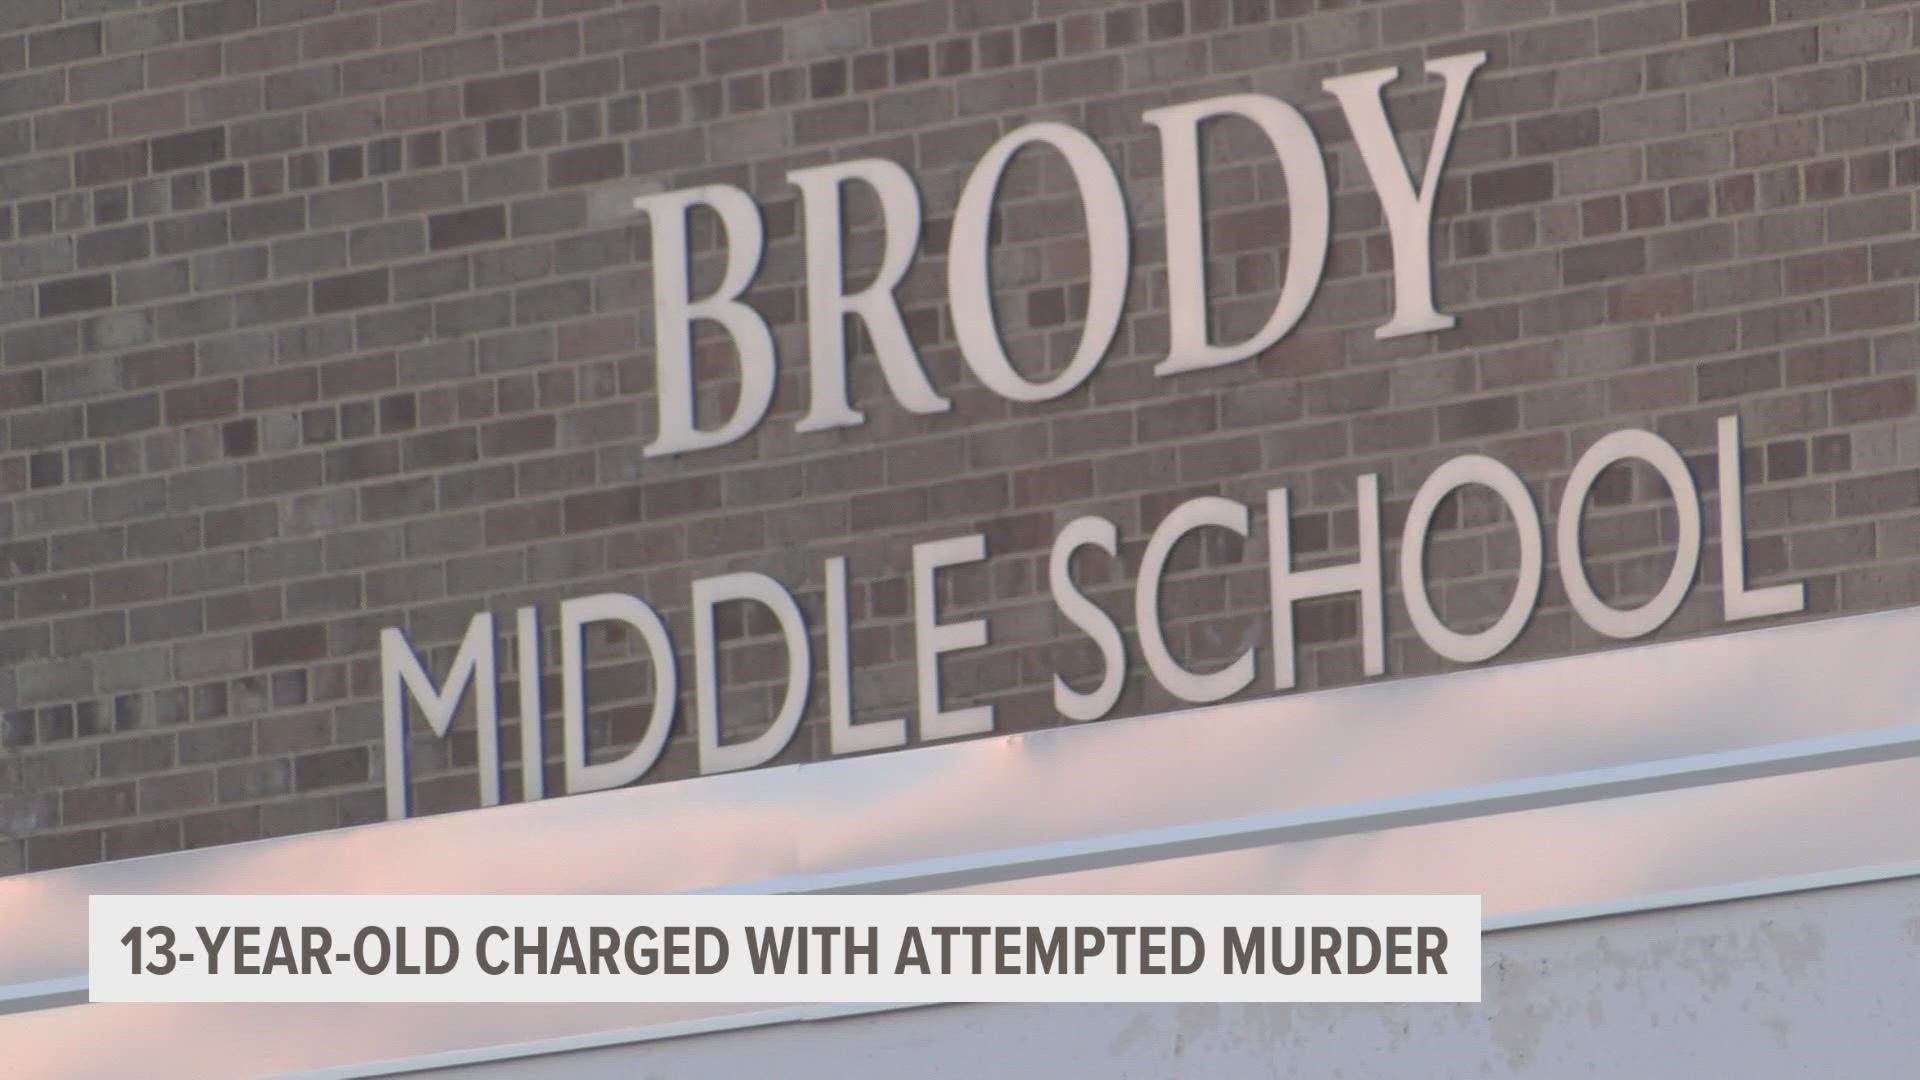 The suspect was arrested on the grounds of Brody Middle School. No students were in direct contact with the suspect, according to the school's principal.